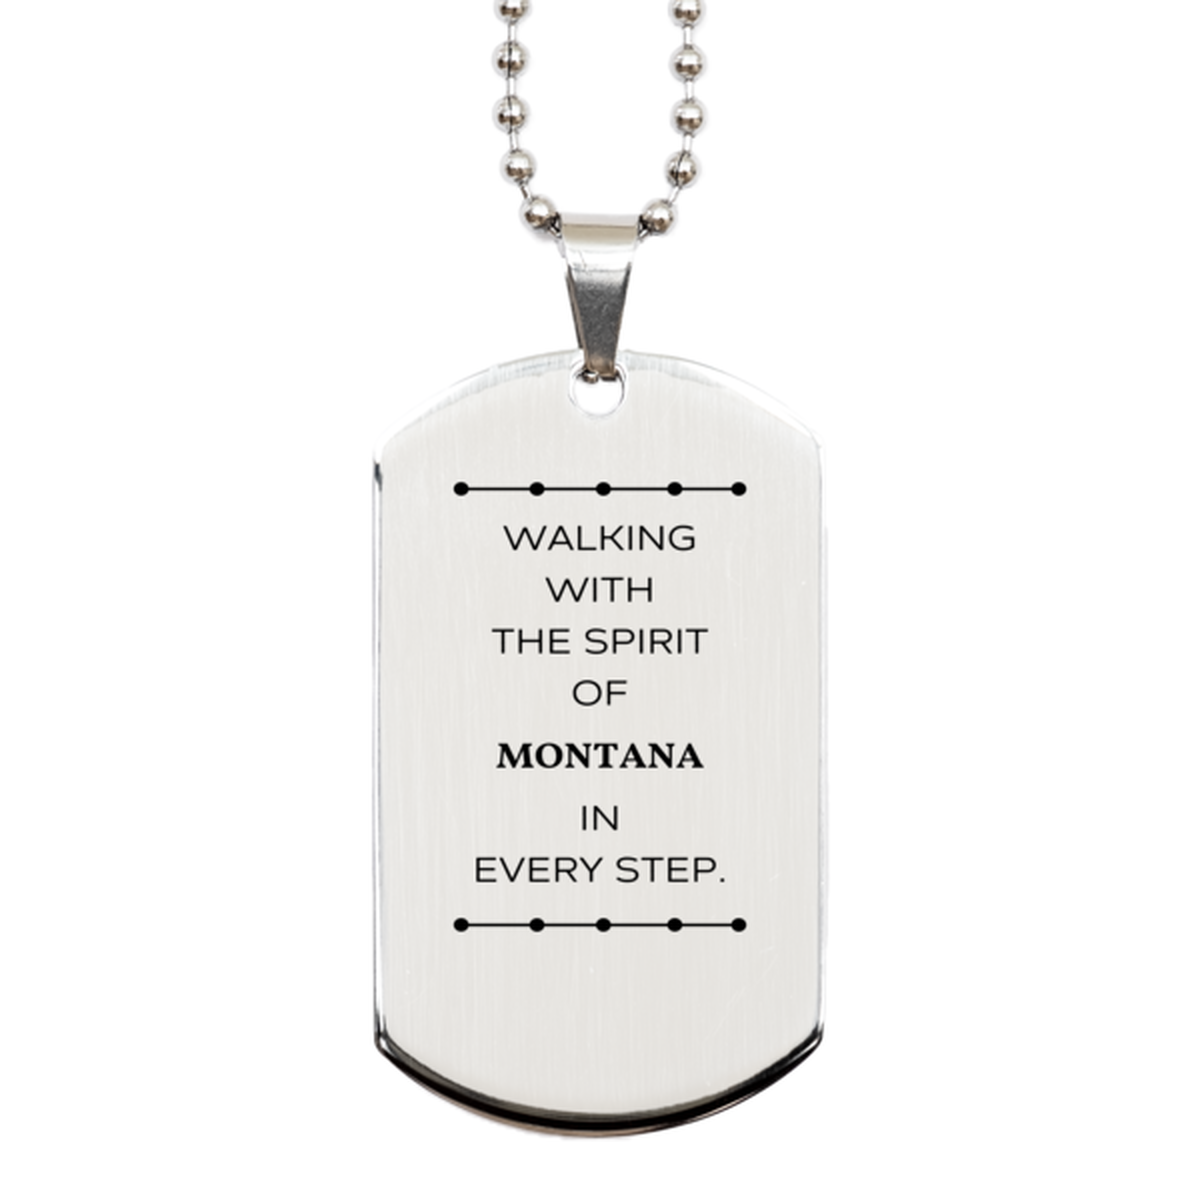 Montana Gifts, Walking with the spirit, Love Montana Birthday Christmas Silver Dog Tag For Montana People, Men, Women, Friends